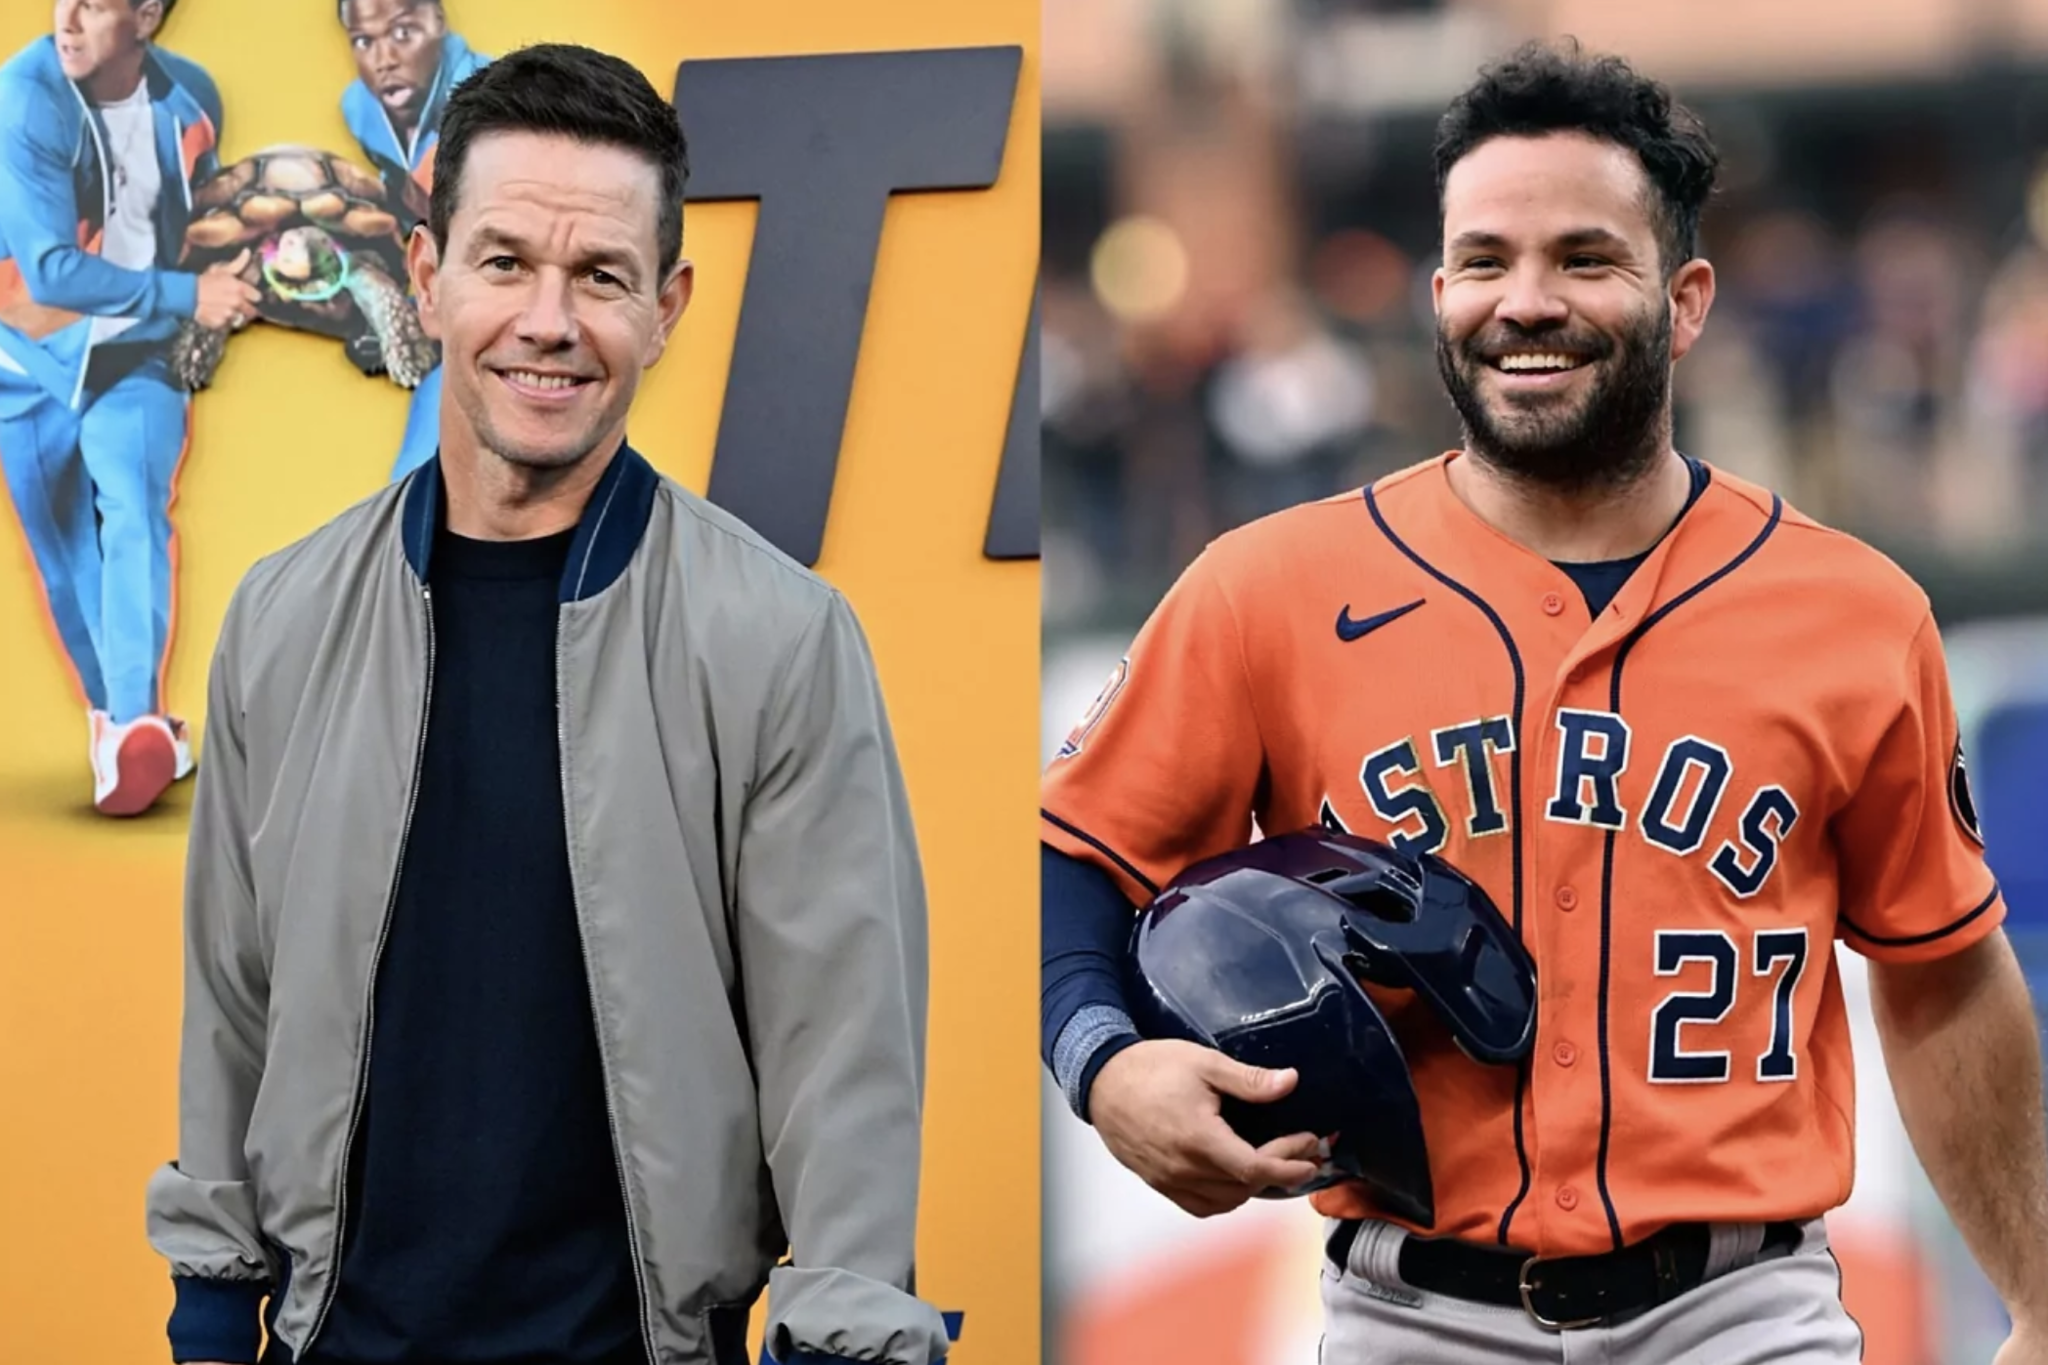 Mark Wahlberg says he's willing to donate his thumb to Astros star Jose Altuve